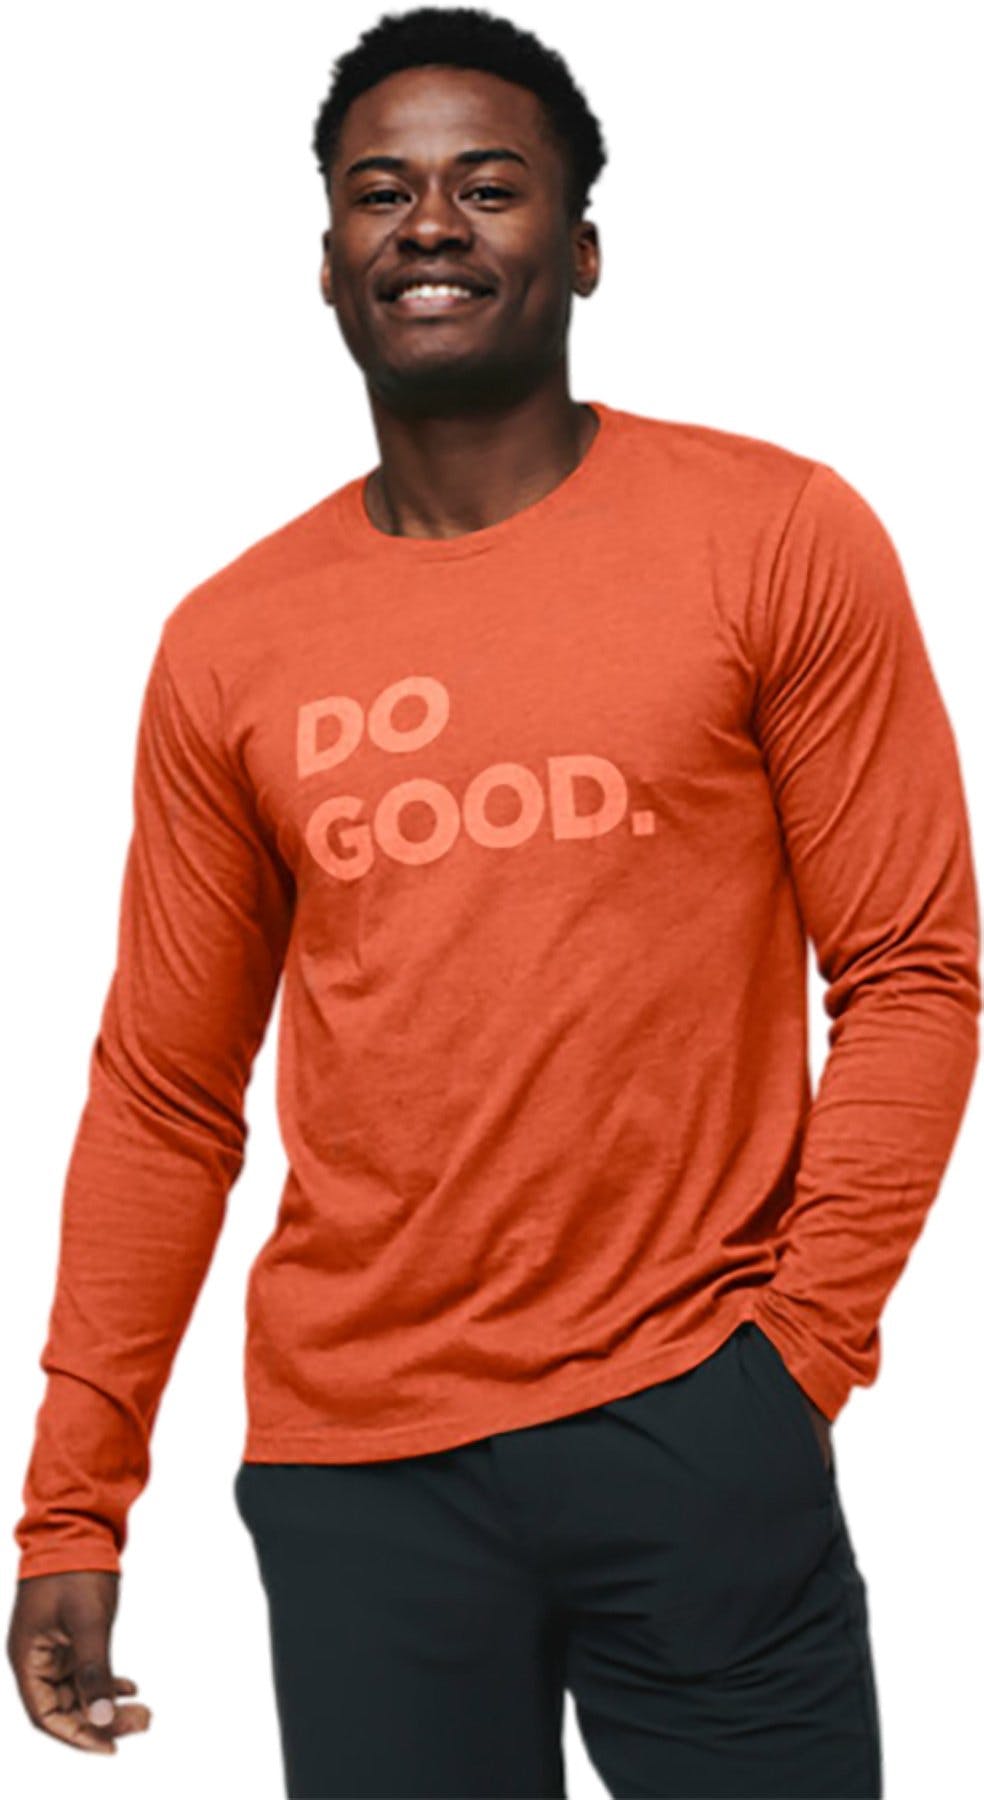 Product image for Do Good Long Sleeve T-shirt - Men's